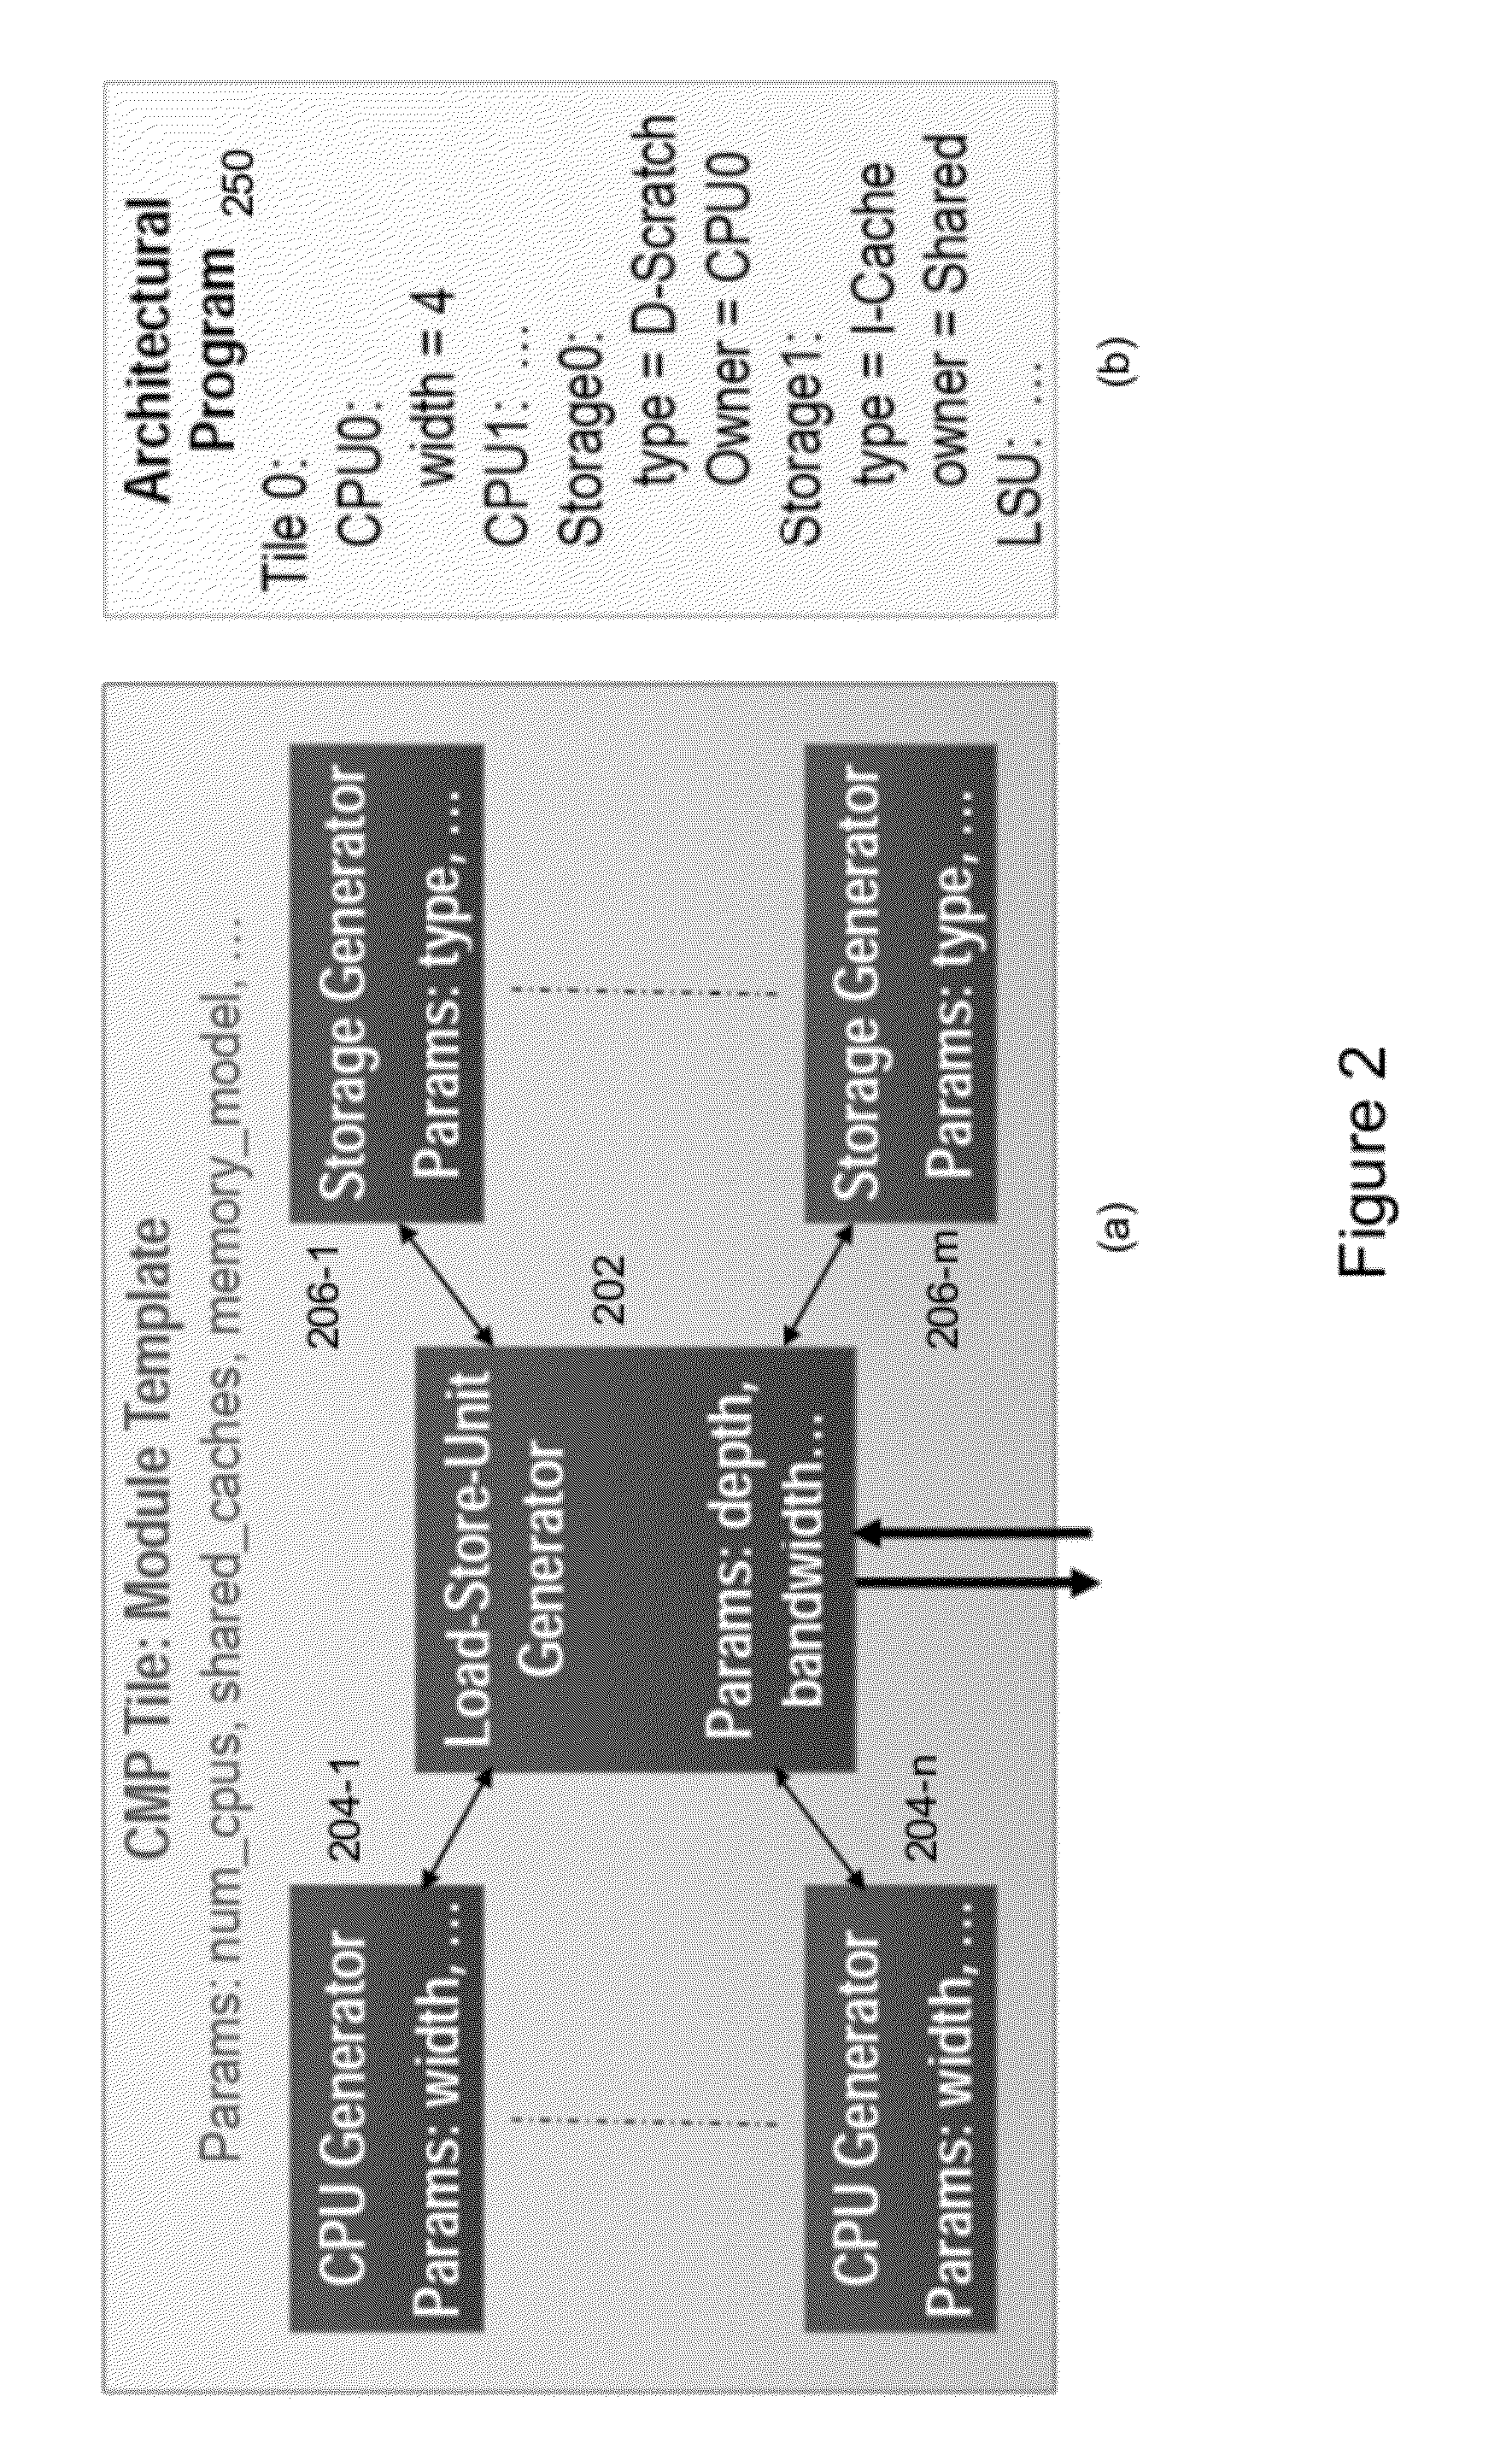 System and Method for a Chip Generator